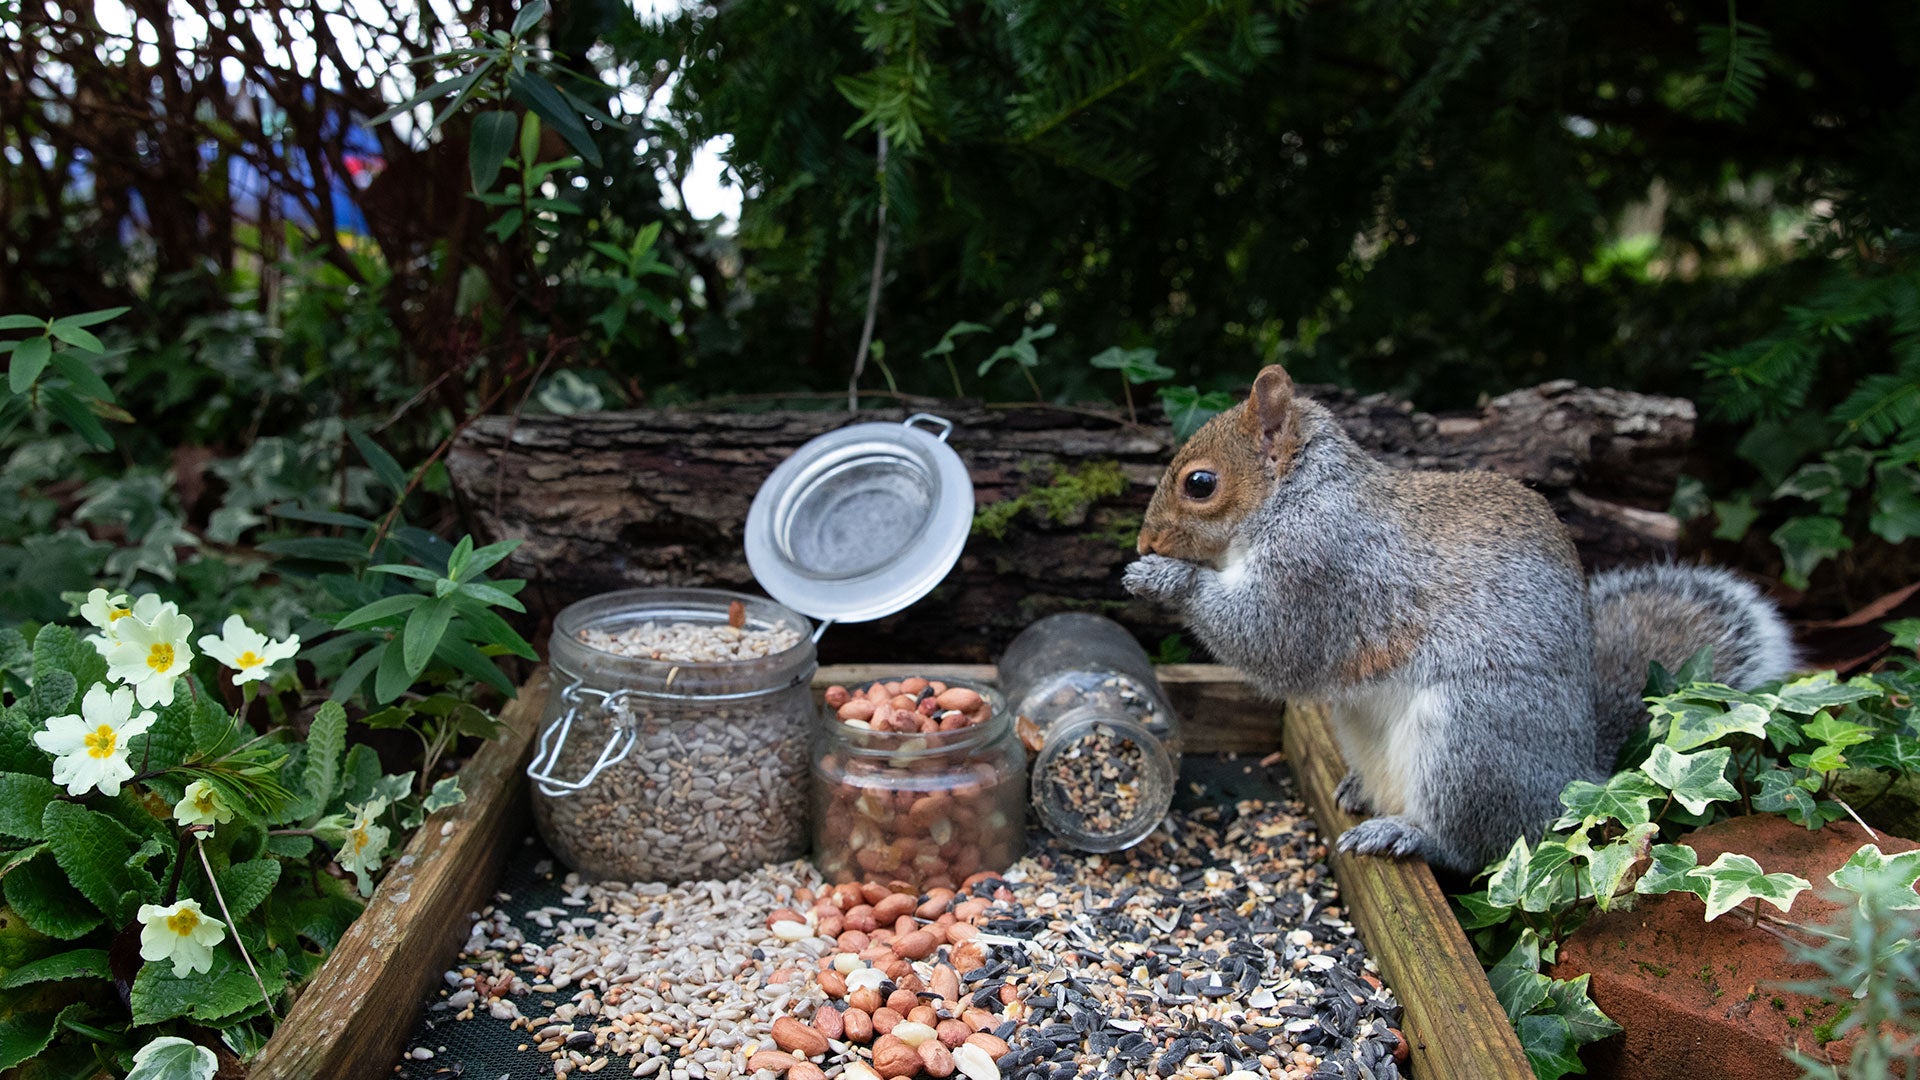 Grey squirrel eating a tray of food